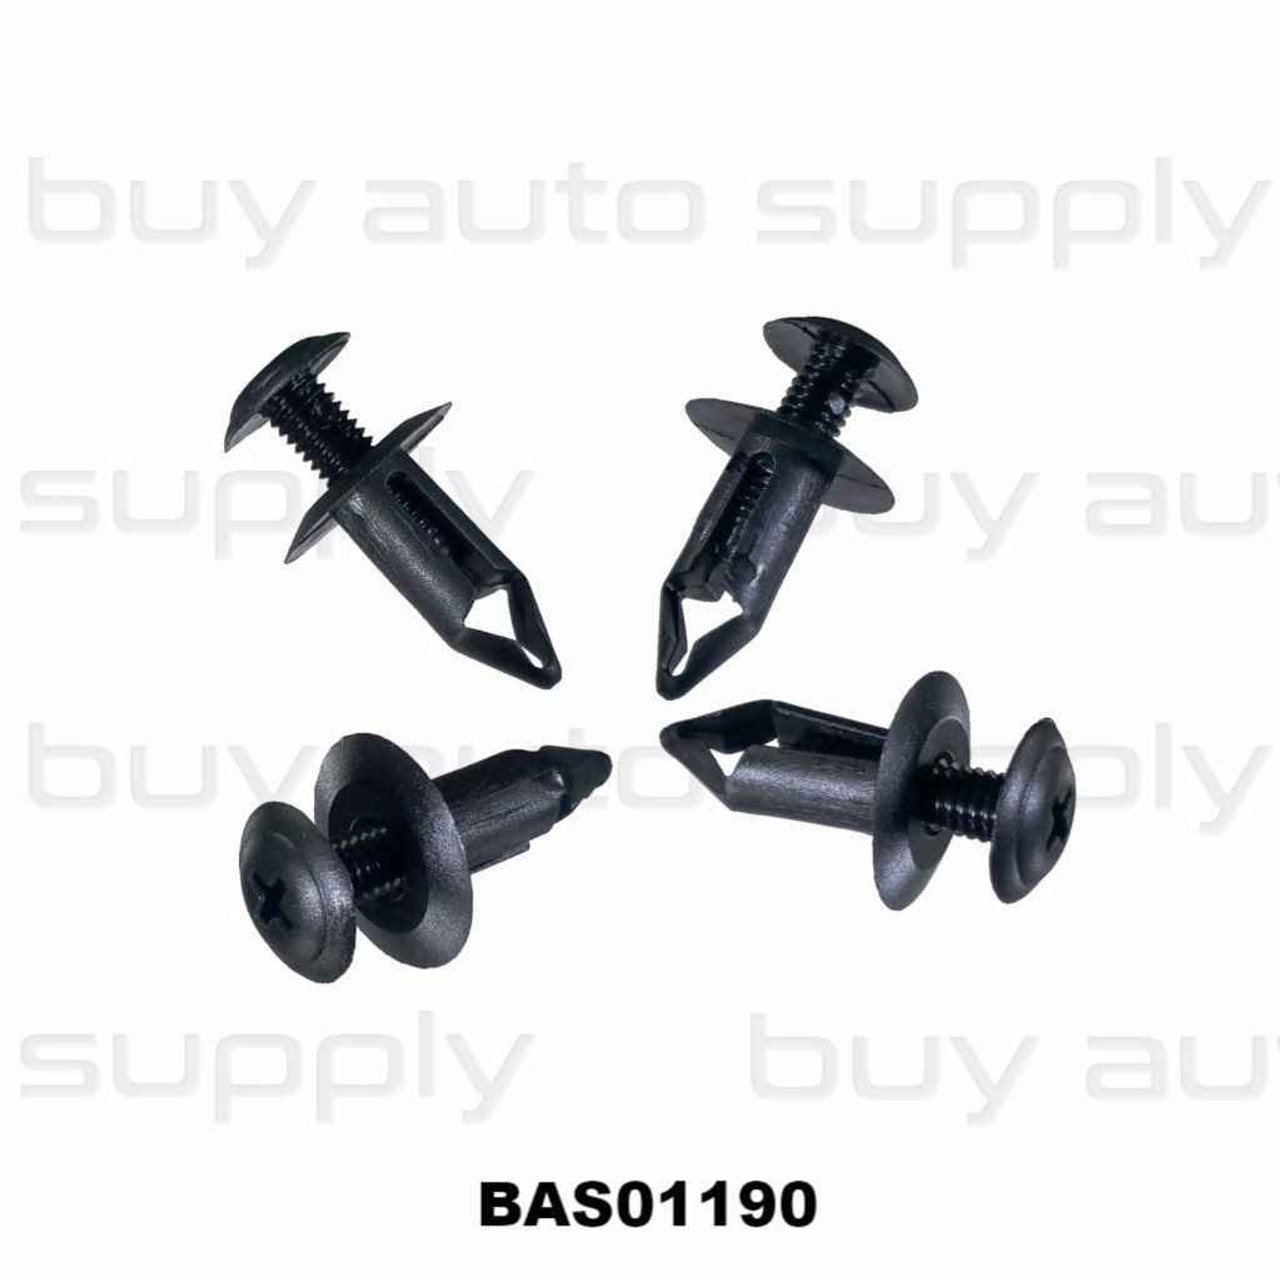 https://cdn11.bigcommerce.com/s-dw4ay6asll/images/stencil/1280x1280/products/237/6050/BAS01190_Nissan_66860-01W01_Push_Clip_Auveco_16859__51020_956__74863.1702778605.jpg?c=2?imbypass=on